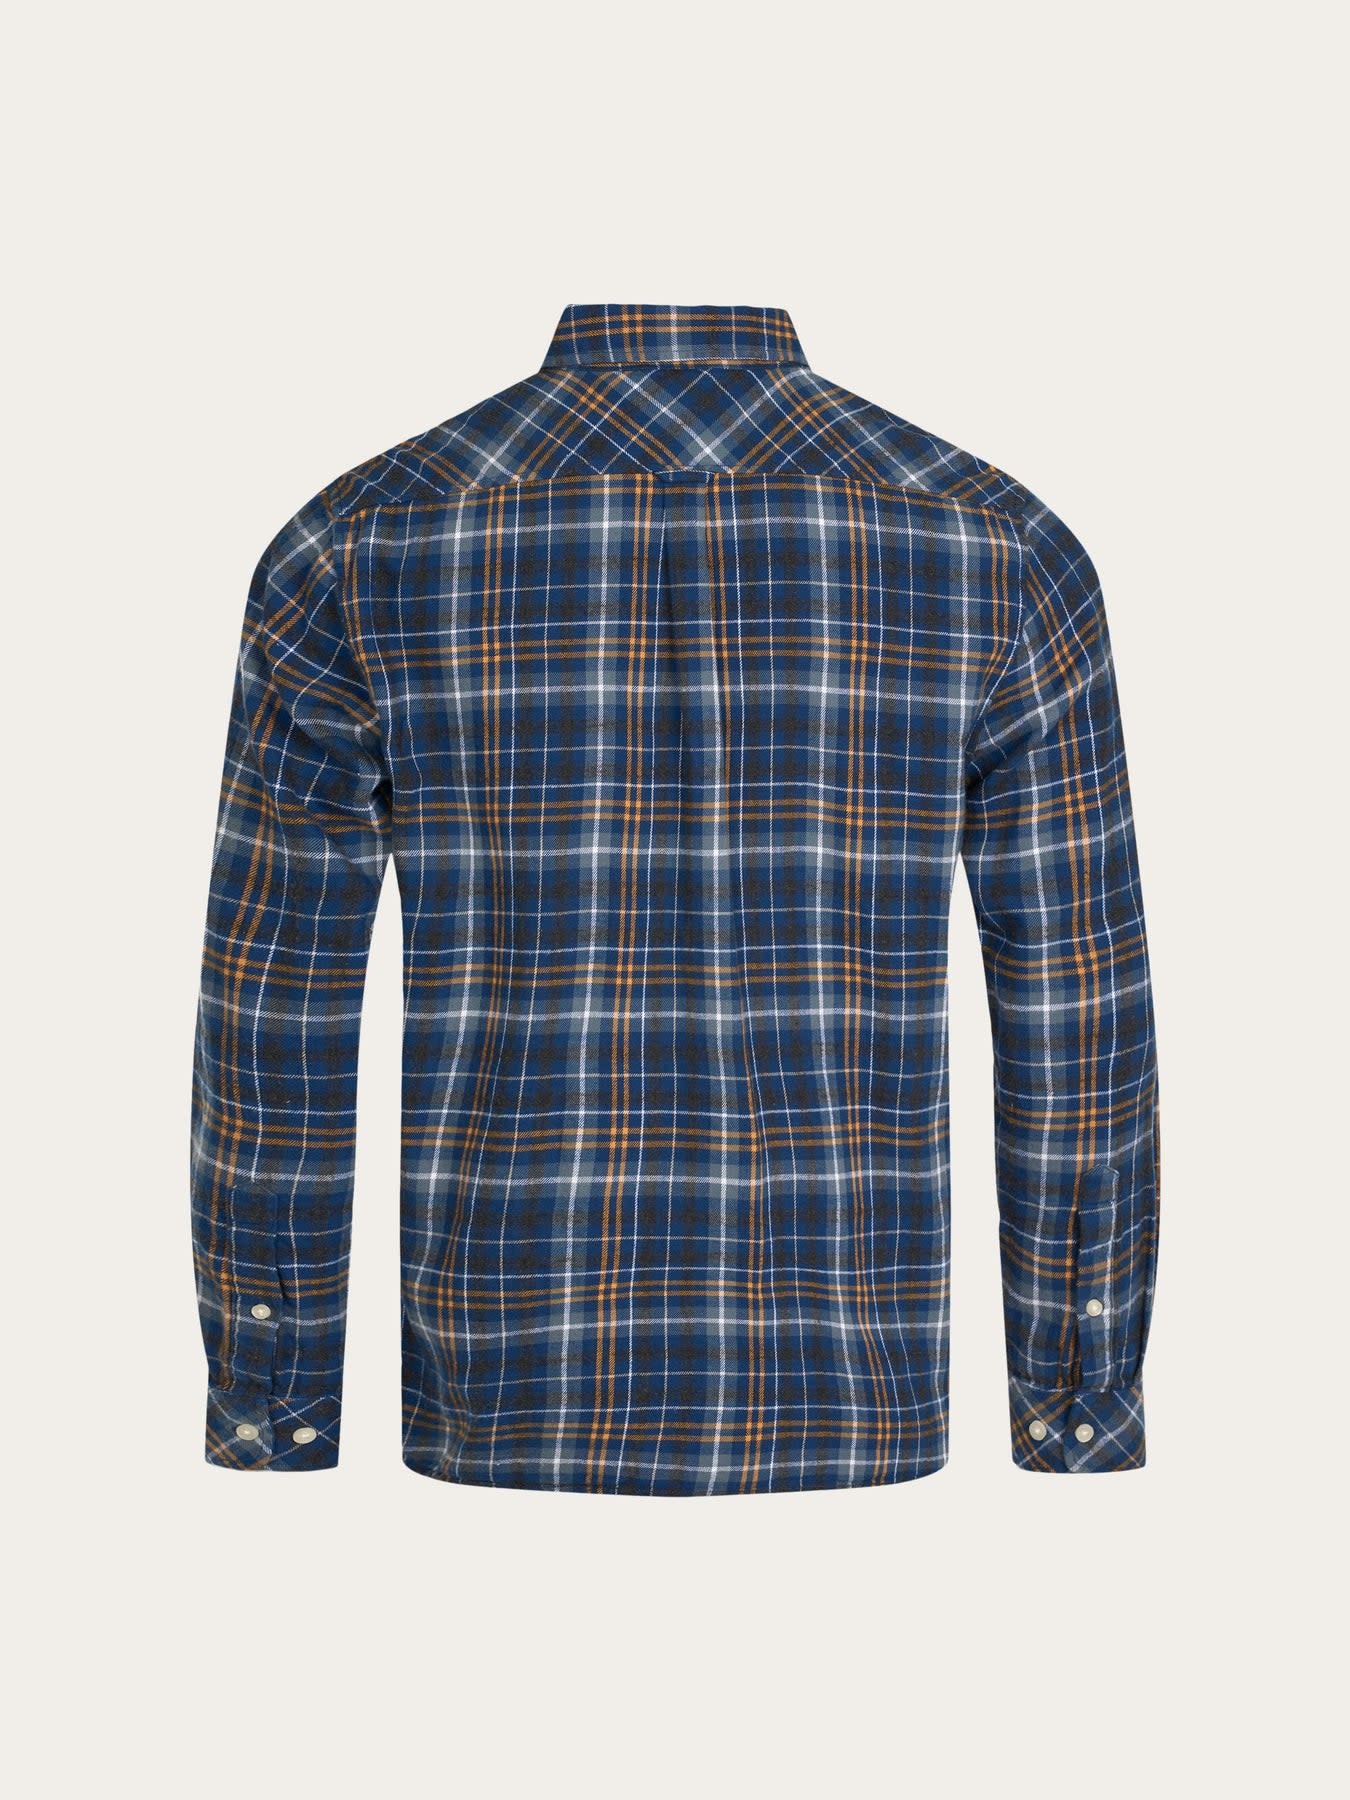 KnowledgeCotton Apparel KnowledgeCotton, Big checked flannel relaxed fit shirt, estate blue, L